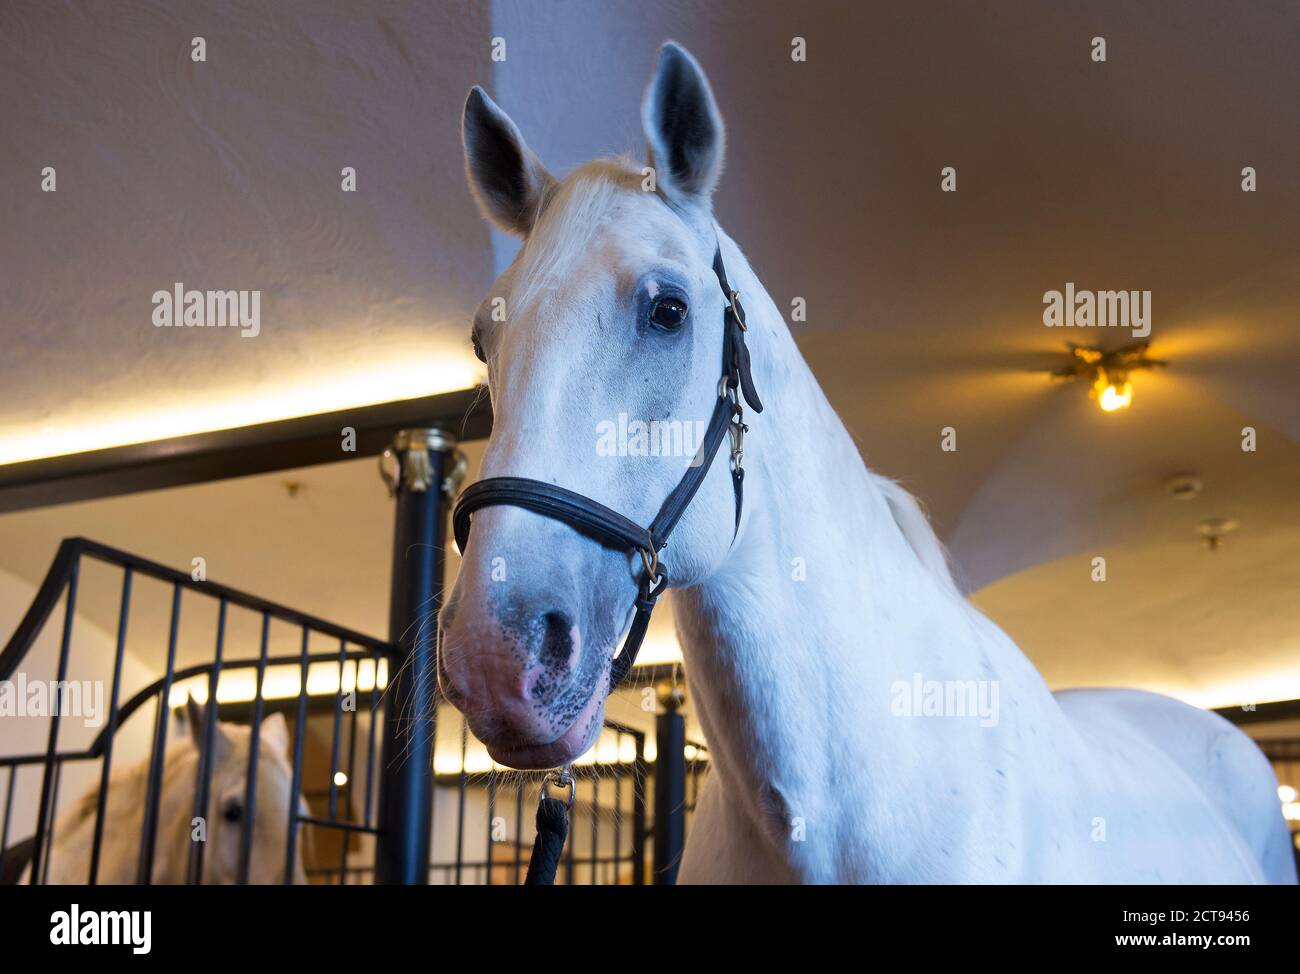 A gorgeous Lipizzaner horse in the stables at the Stanglwirt Hotel in Going, Austria. PHOTO CREDIT : © MARK PAIN / ALAMY STOCK PHOTO Stock Photo